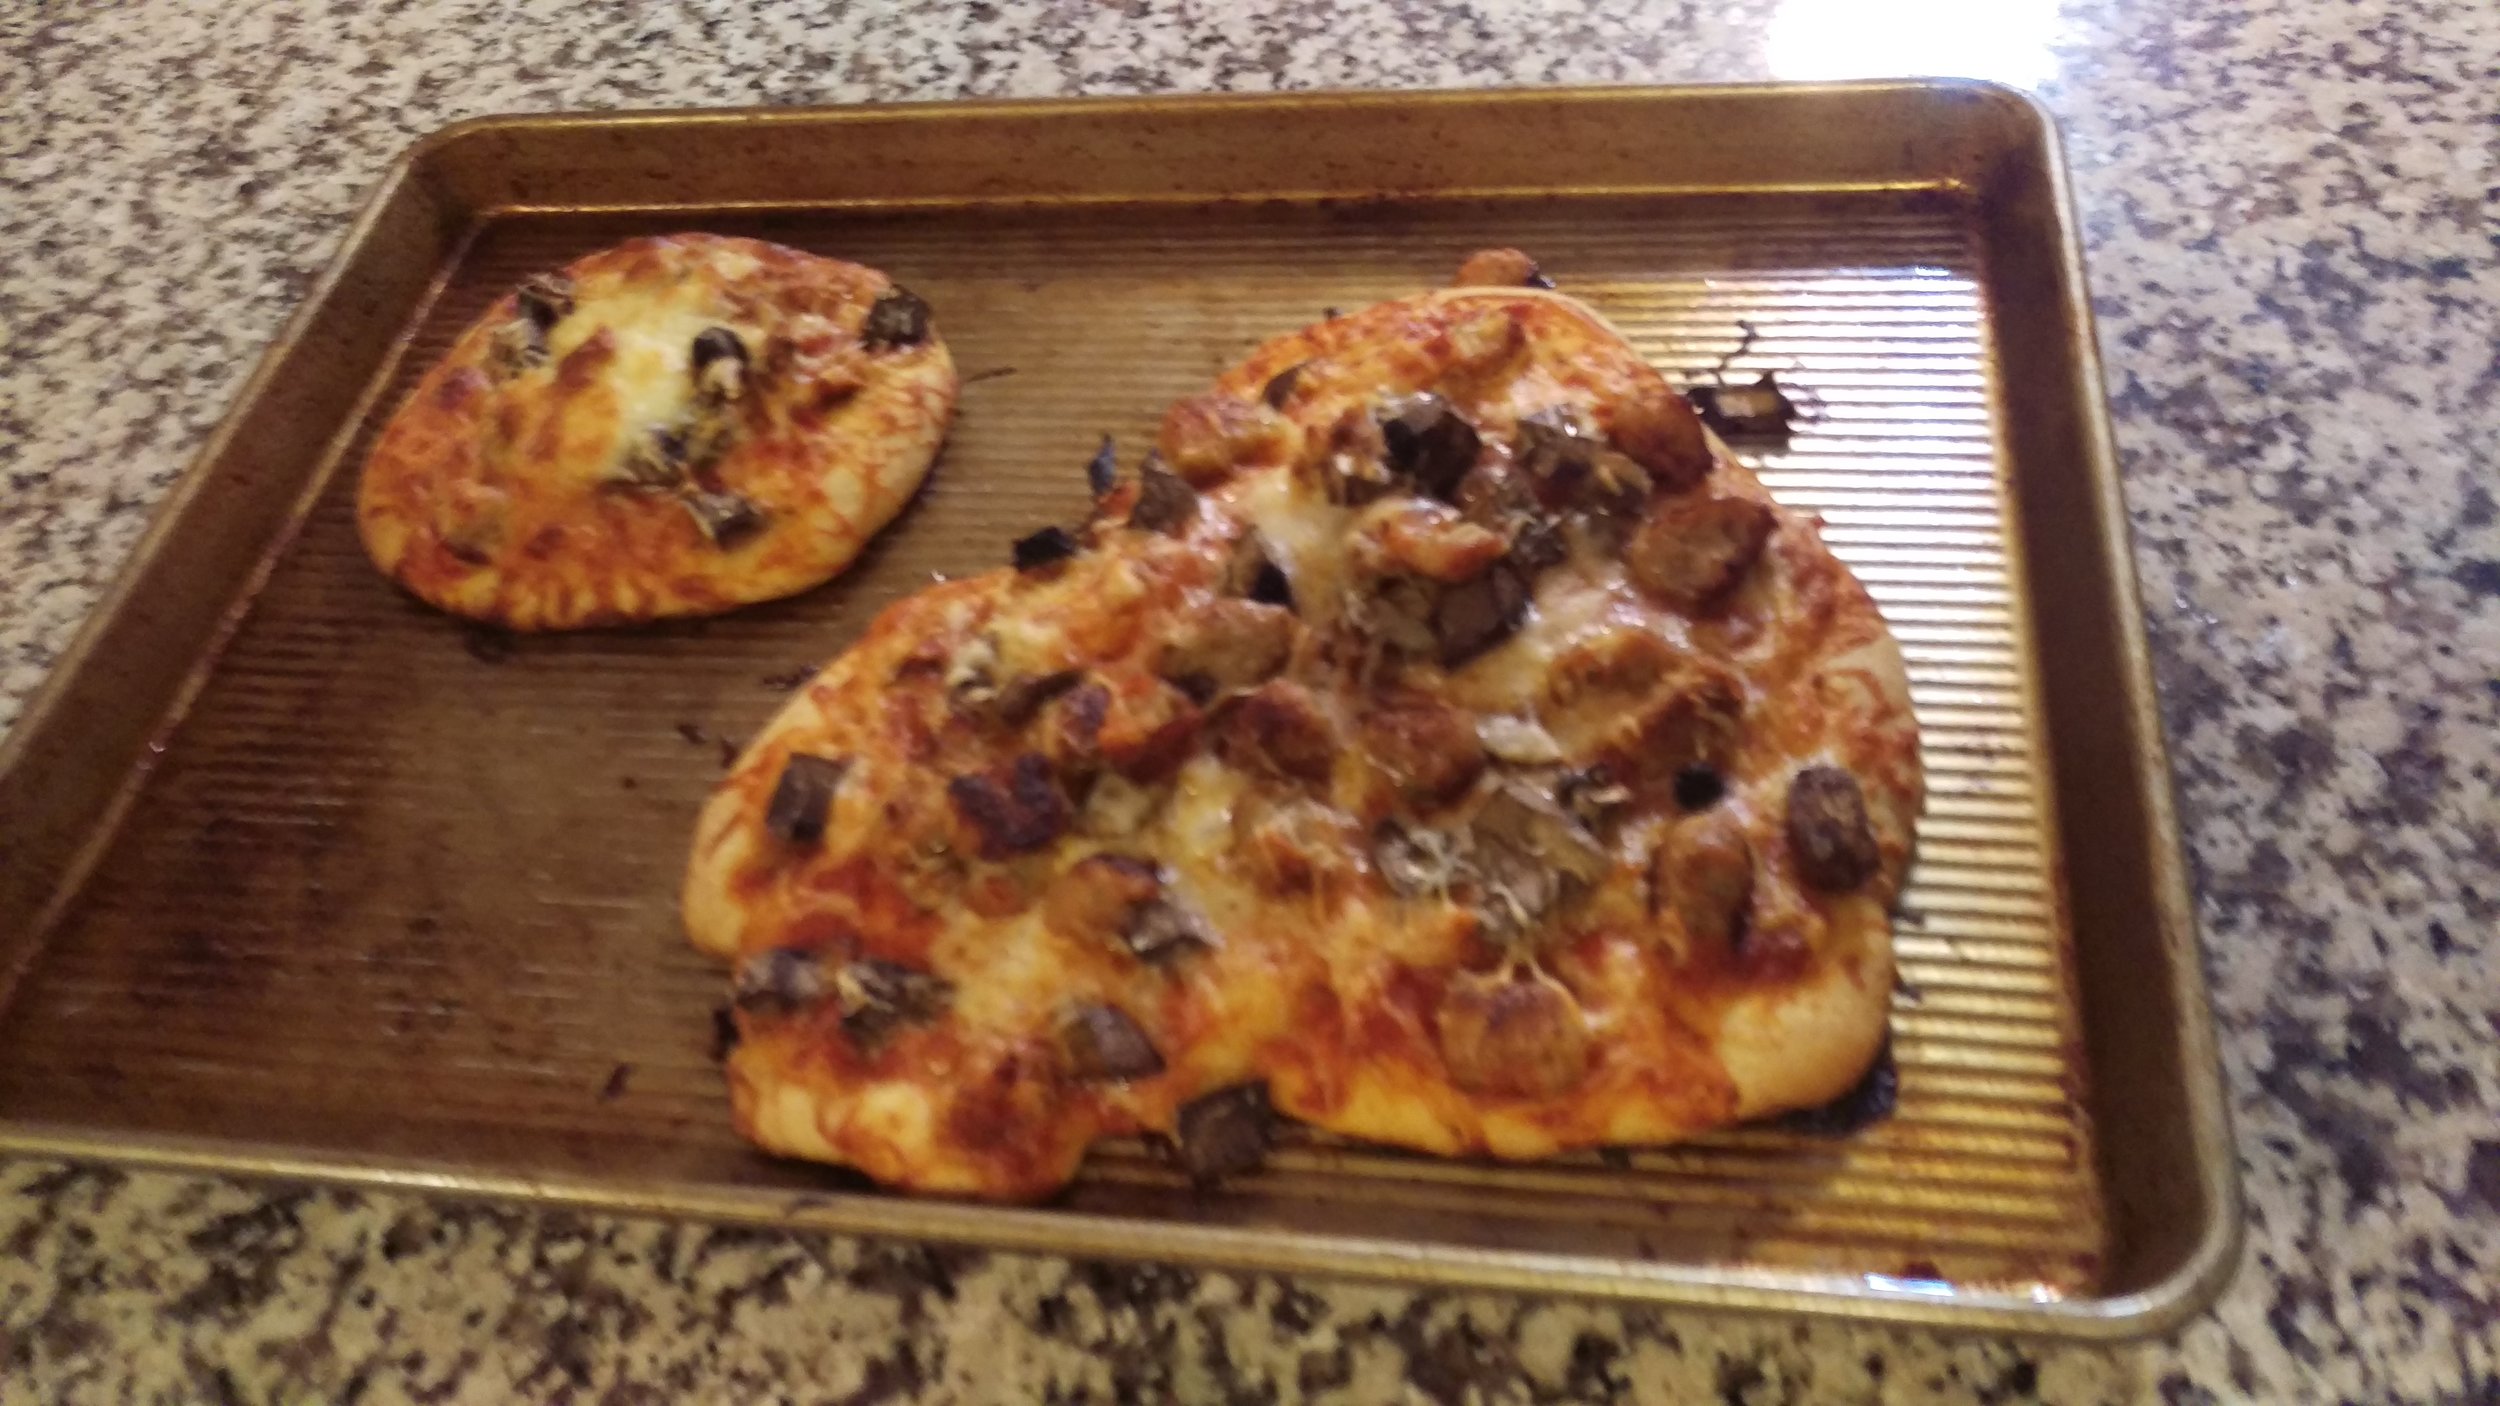 Finished pizzas